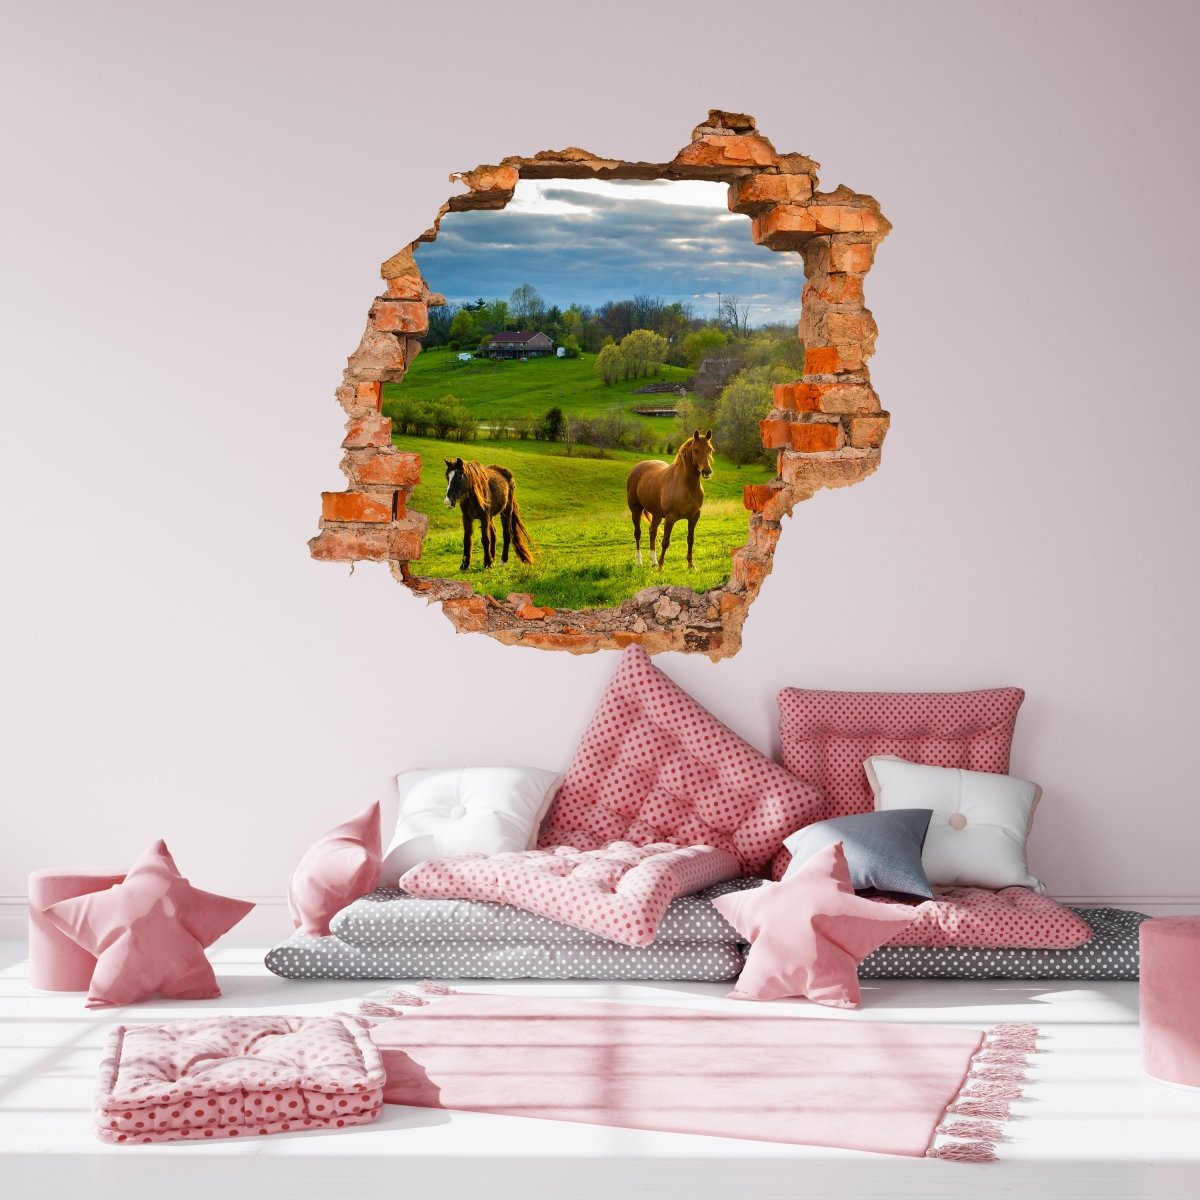 3D wall sticker 2 horses in the paddock, horse, animals - wall decal M1087